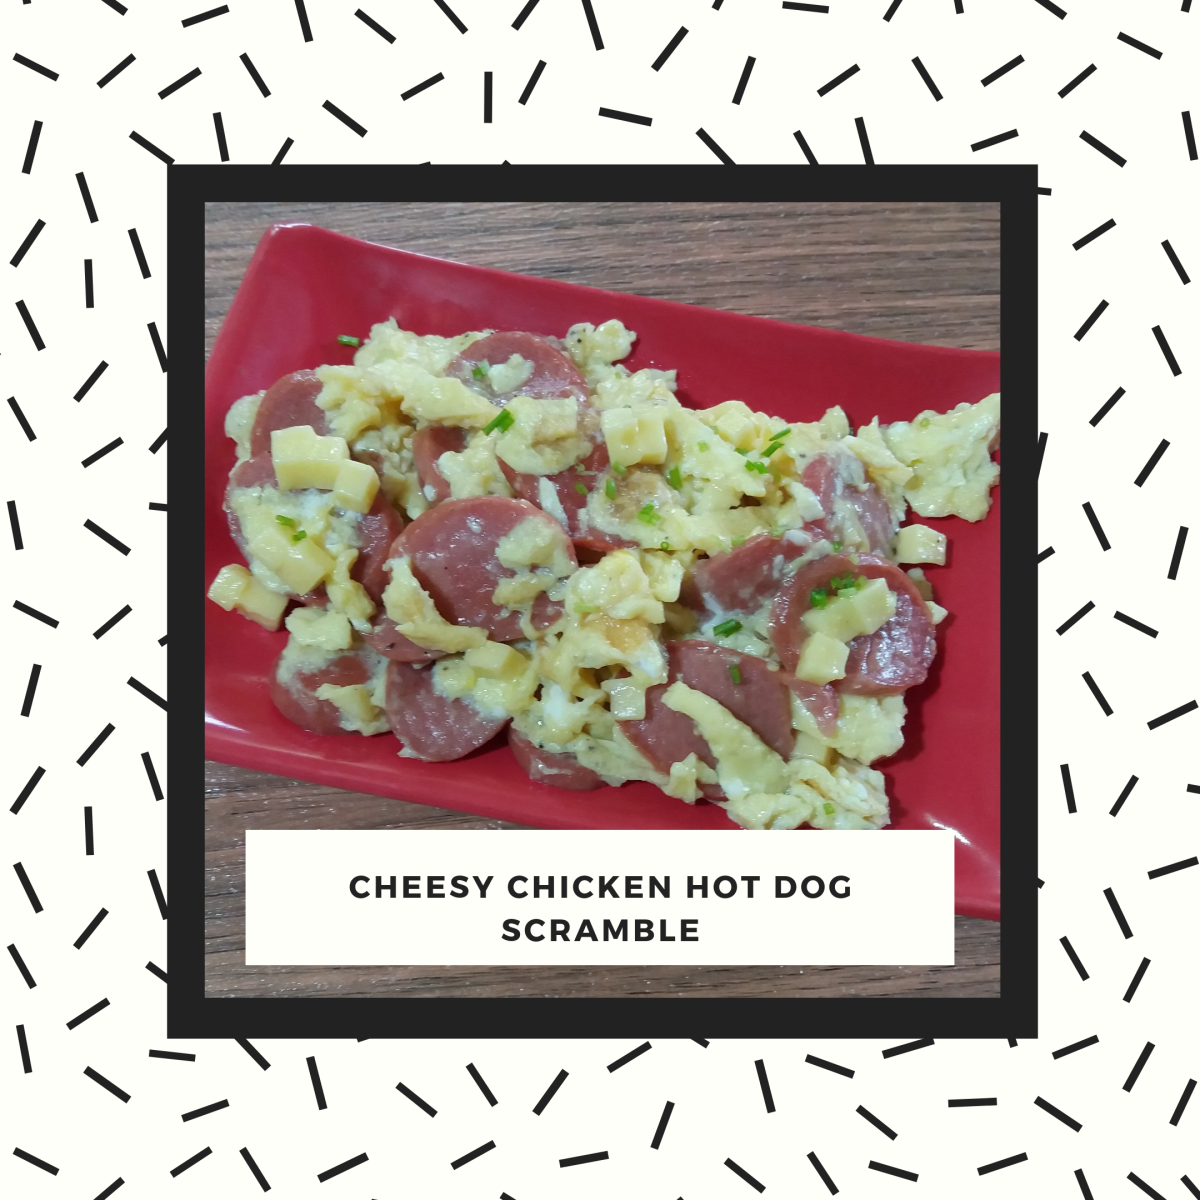 How to Cook Cheesy Chicken Hot Dog Scramble